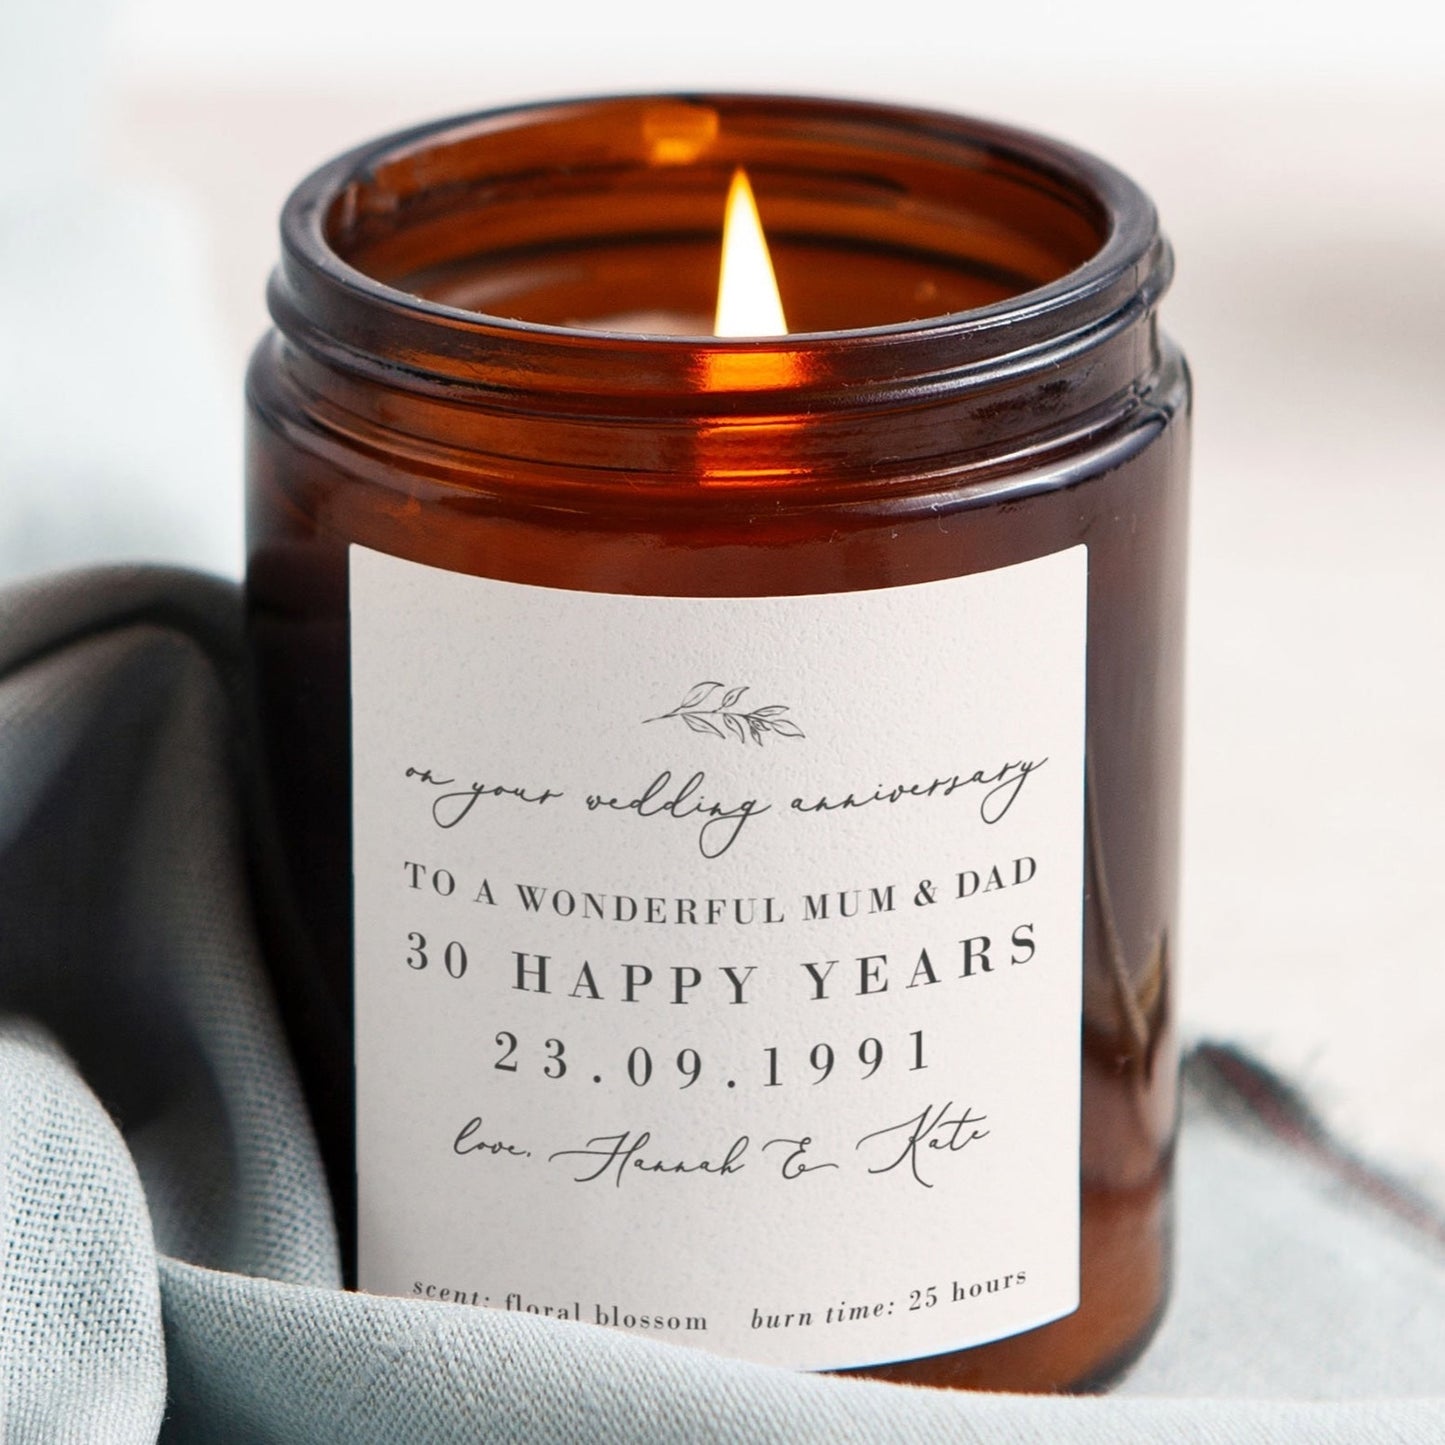 Mum and Dad Wedding Anniversary Candle Gift - Kindred Fires